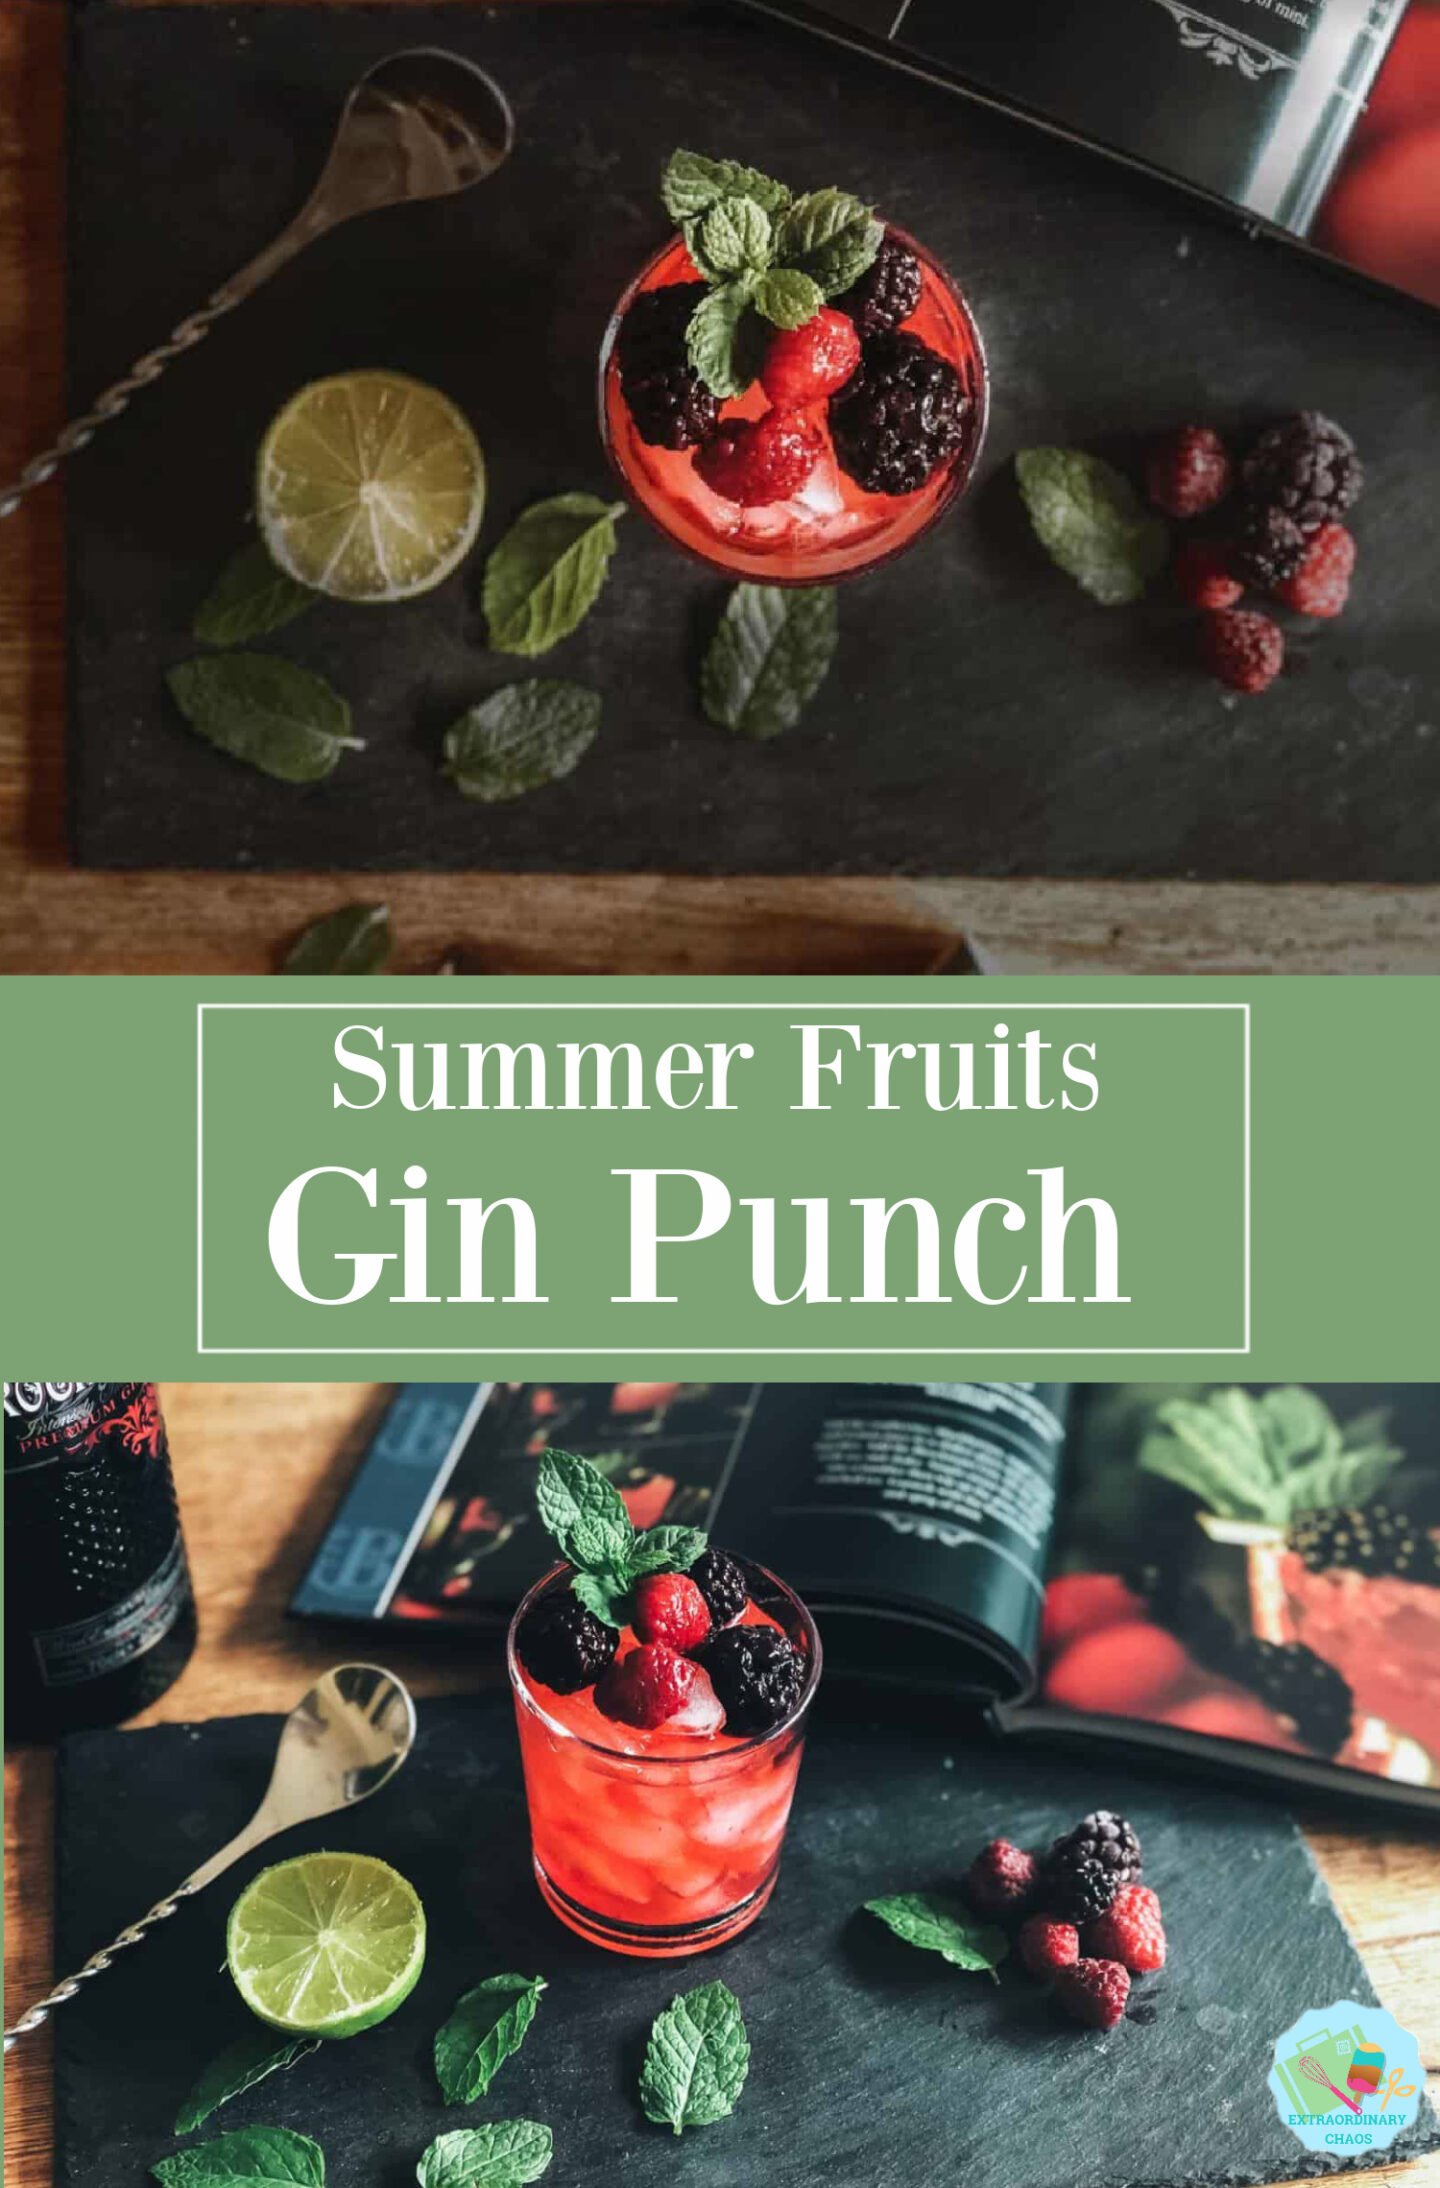 Summer fruits gin punch recipe and easy cocktail recipe to make for holiday parties and drinks